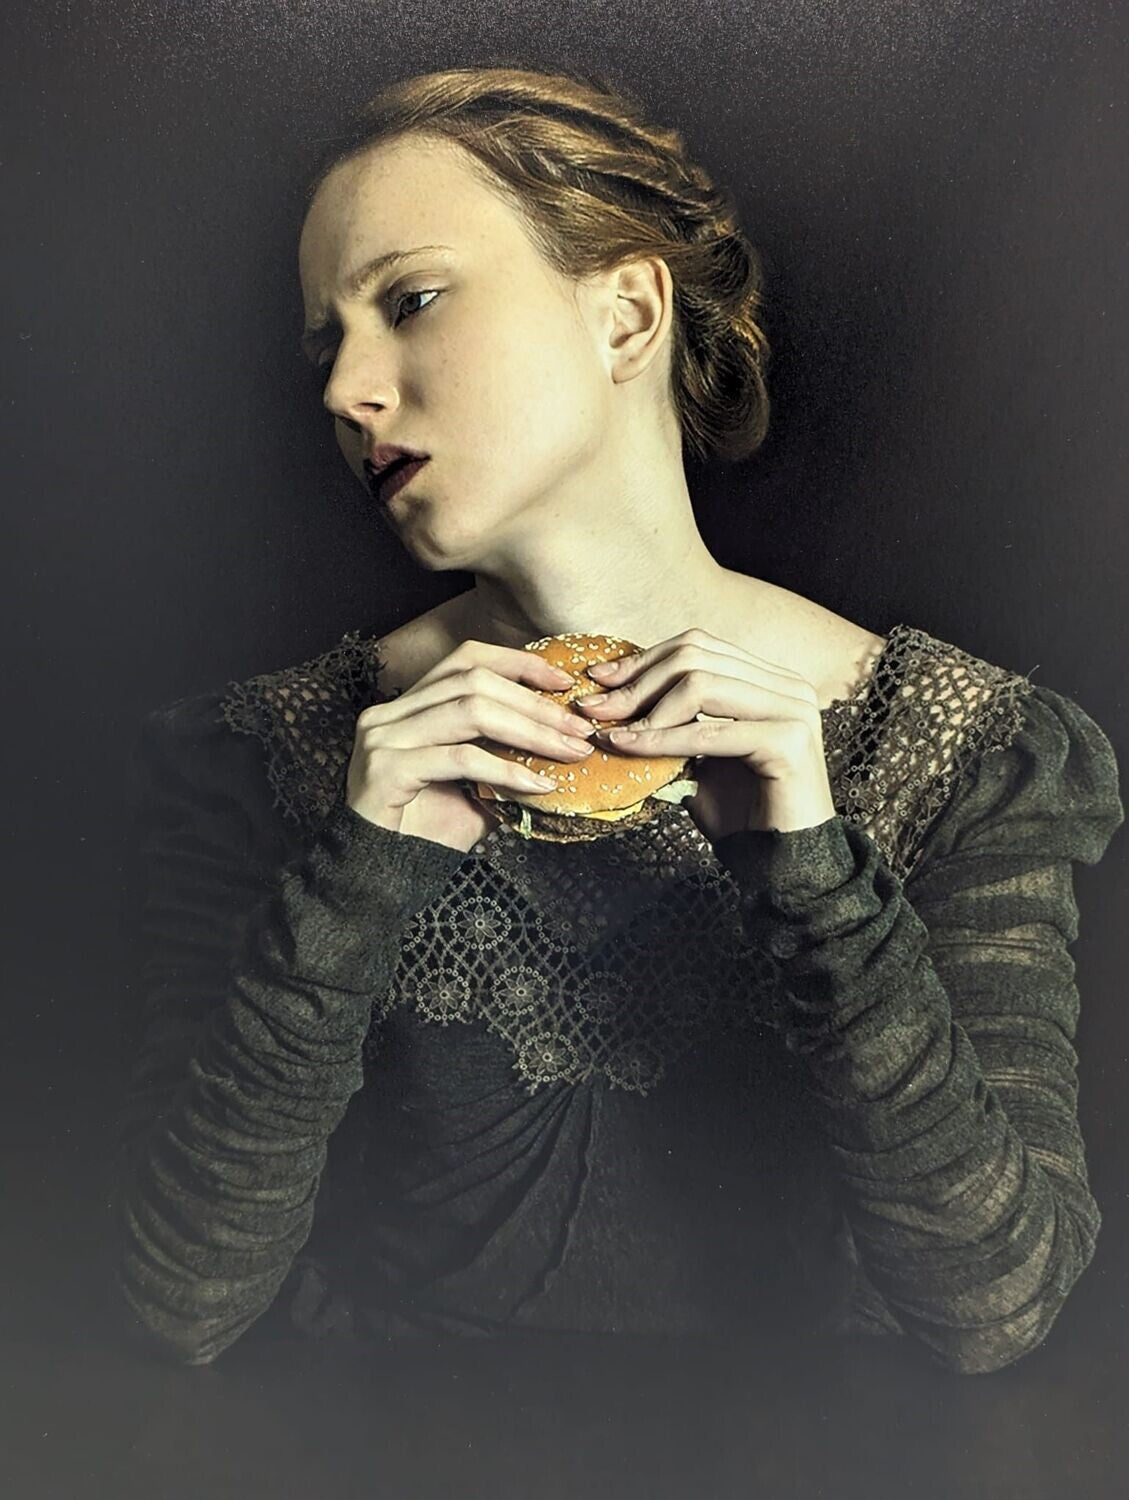 Romina Ressia - Burger - Sold out edition